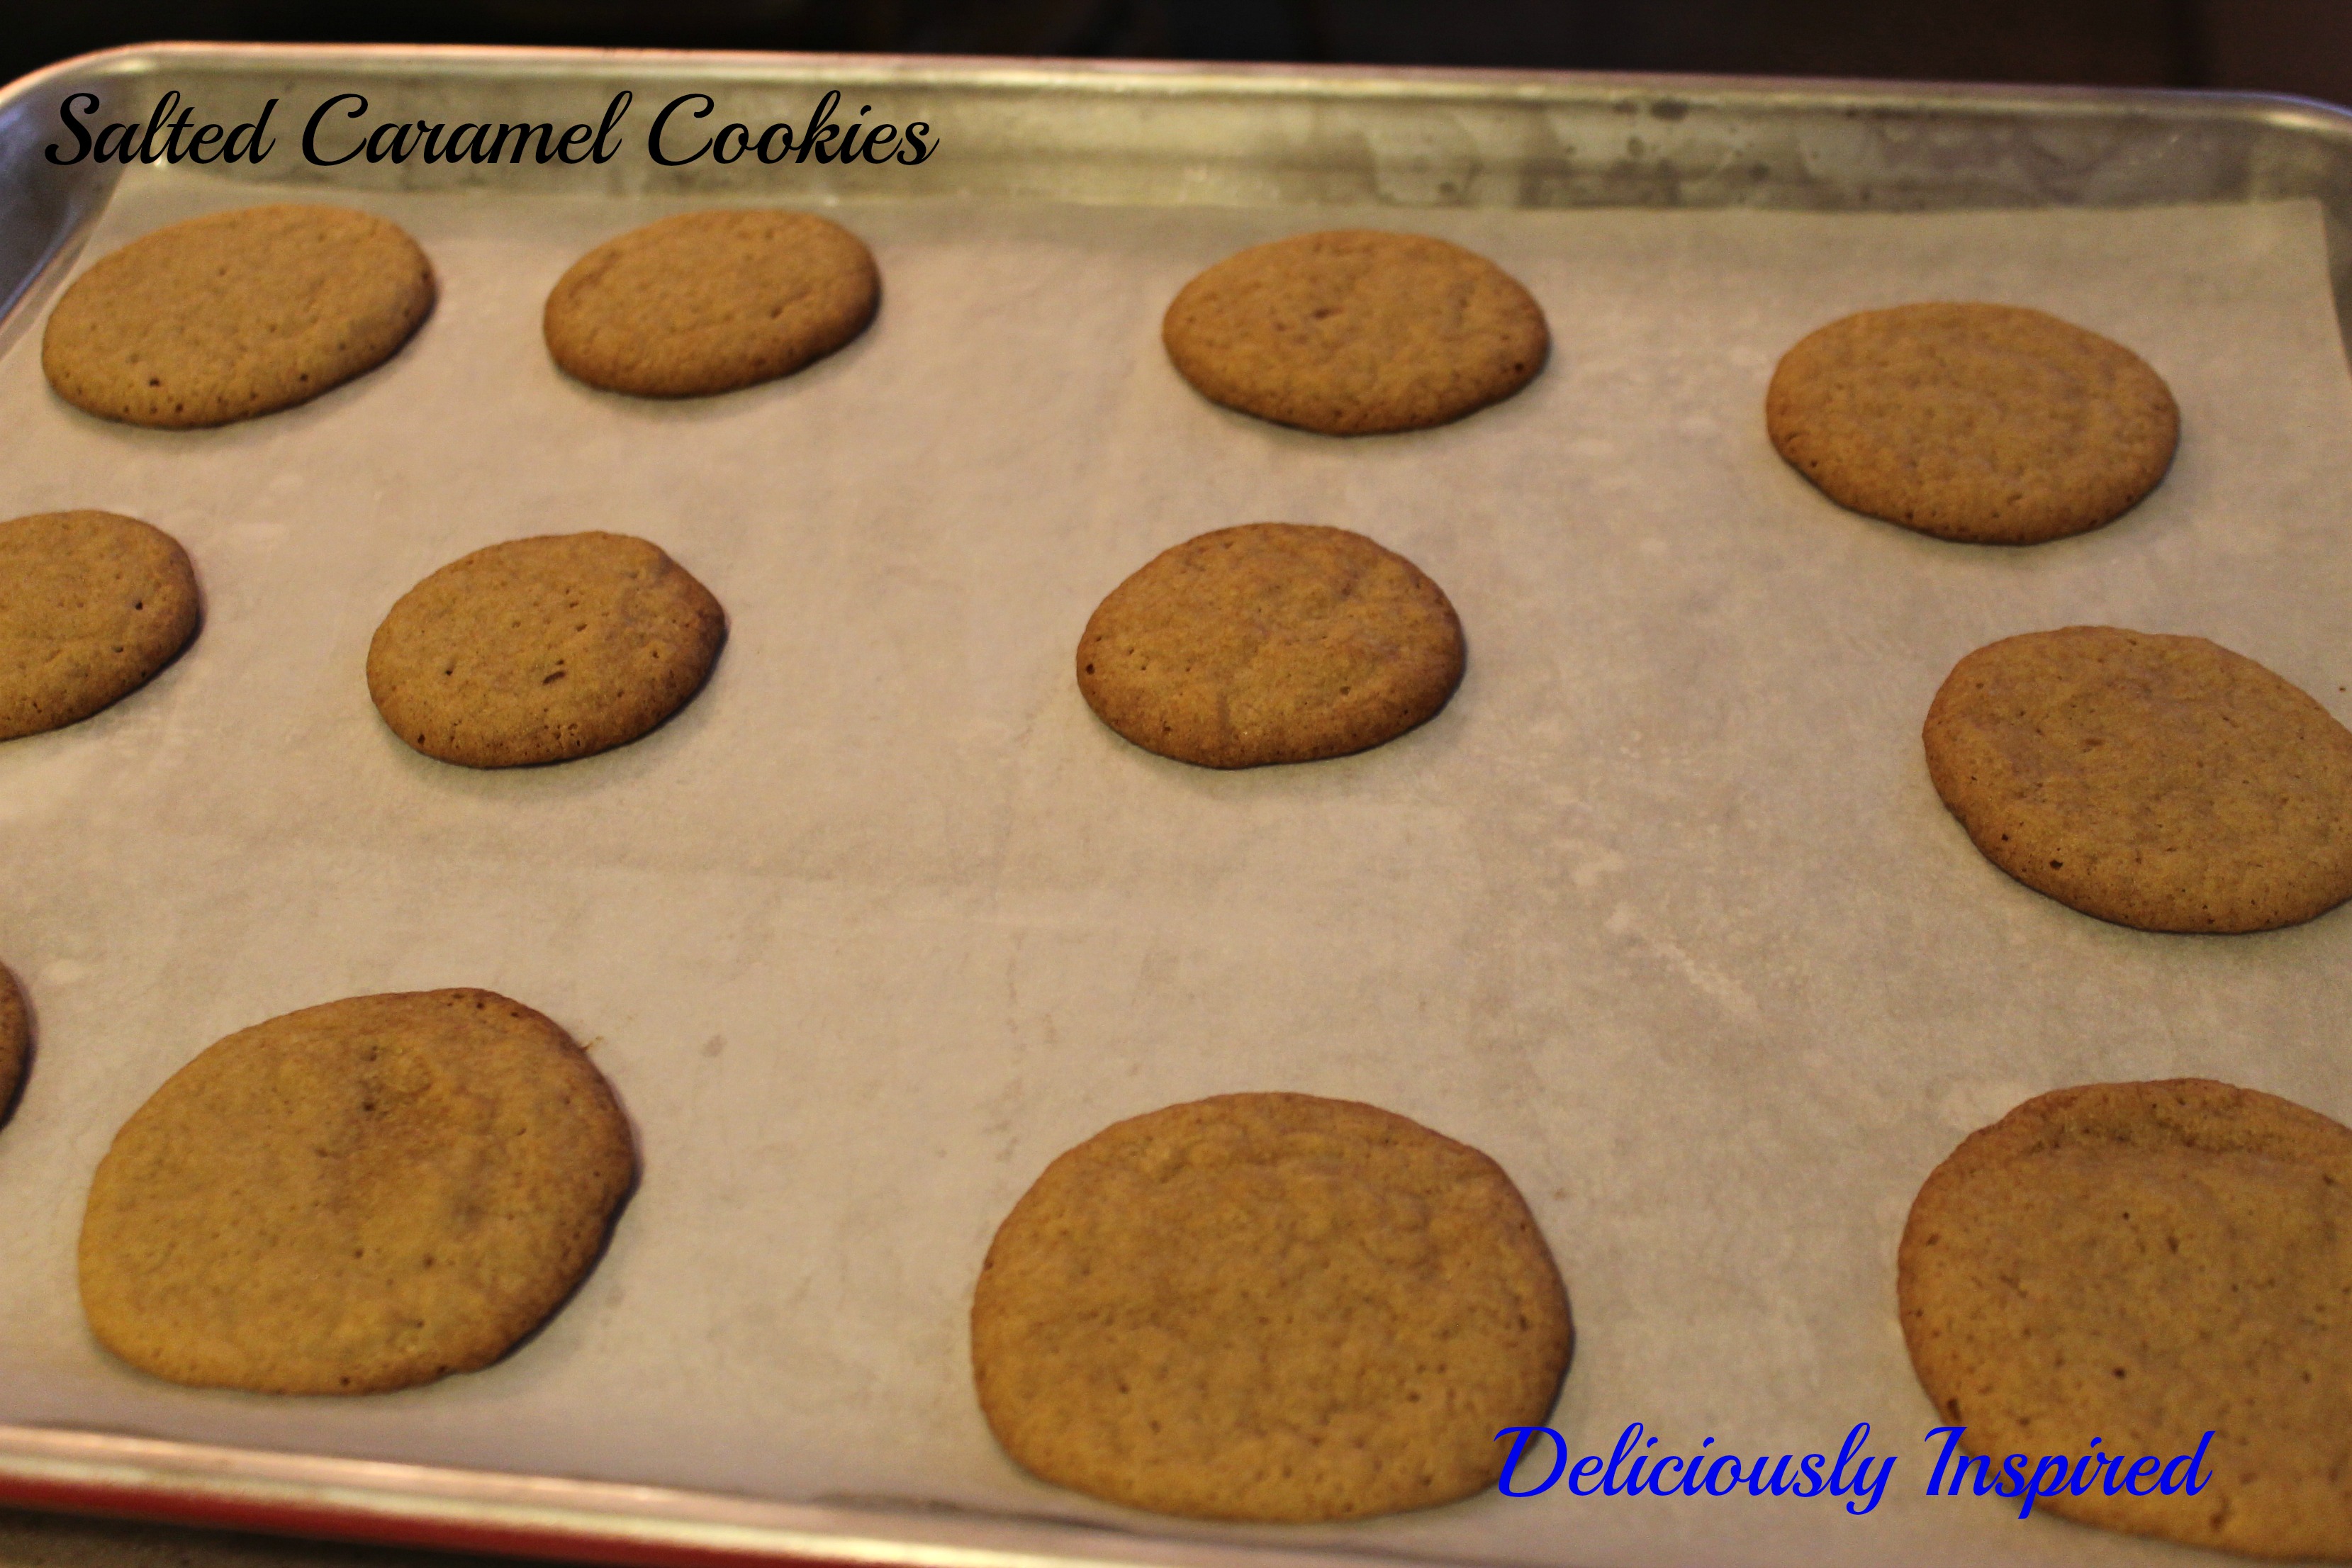 Salted Caramel Cookies - baked